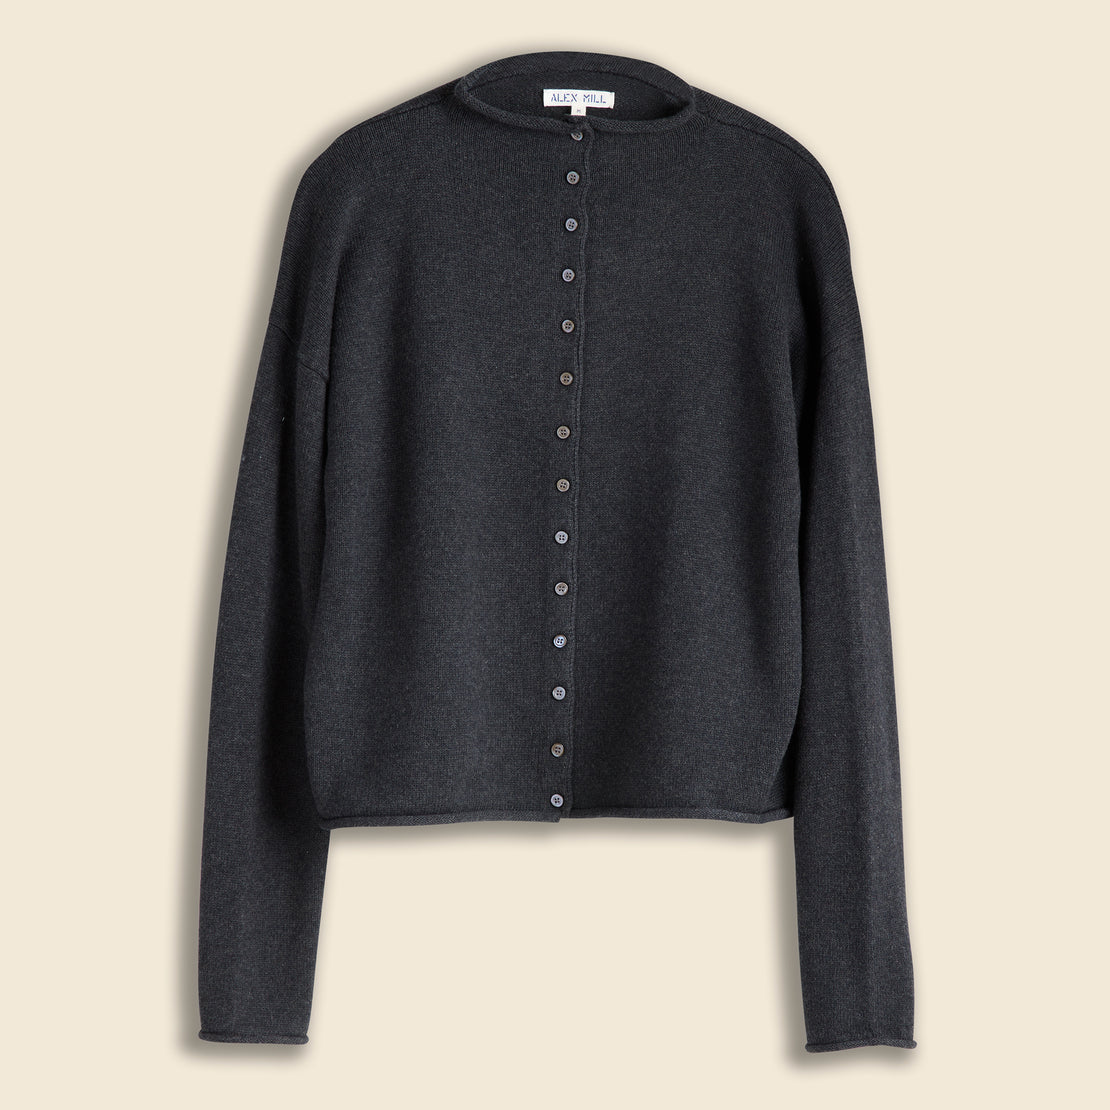 Alex Mill Taylor Cardigan In Cotton Cashmere Blend - Charcoal